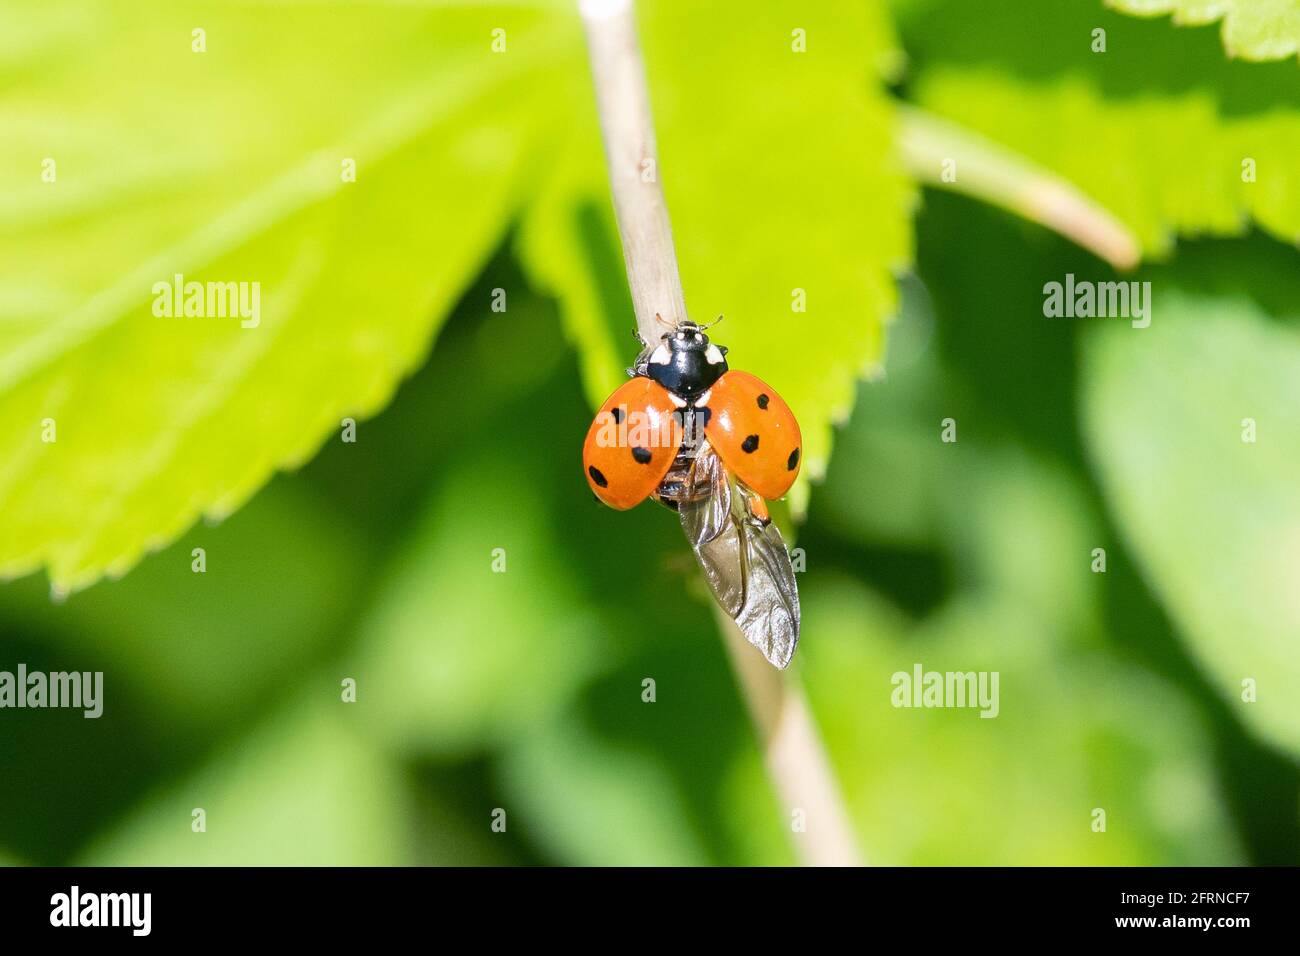 Ladybird with one wing (hindwing) fully open showing detail of veins - uk Stock Photo